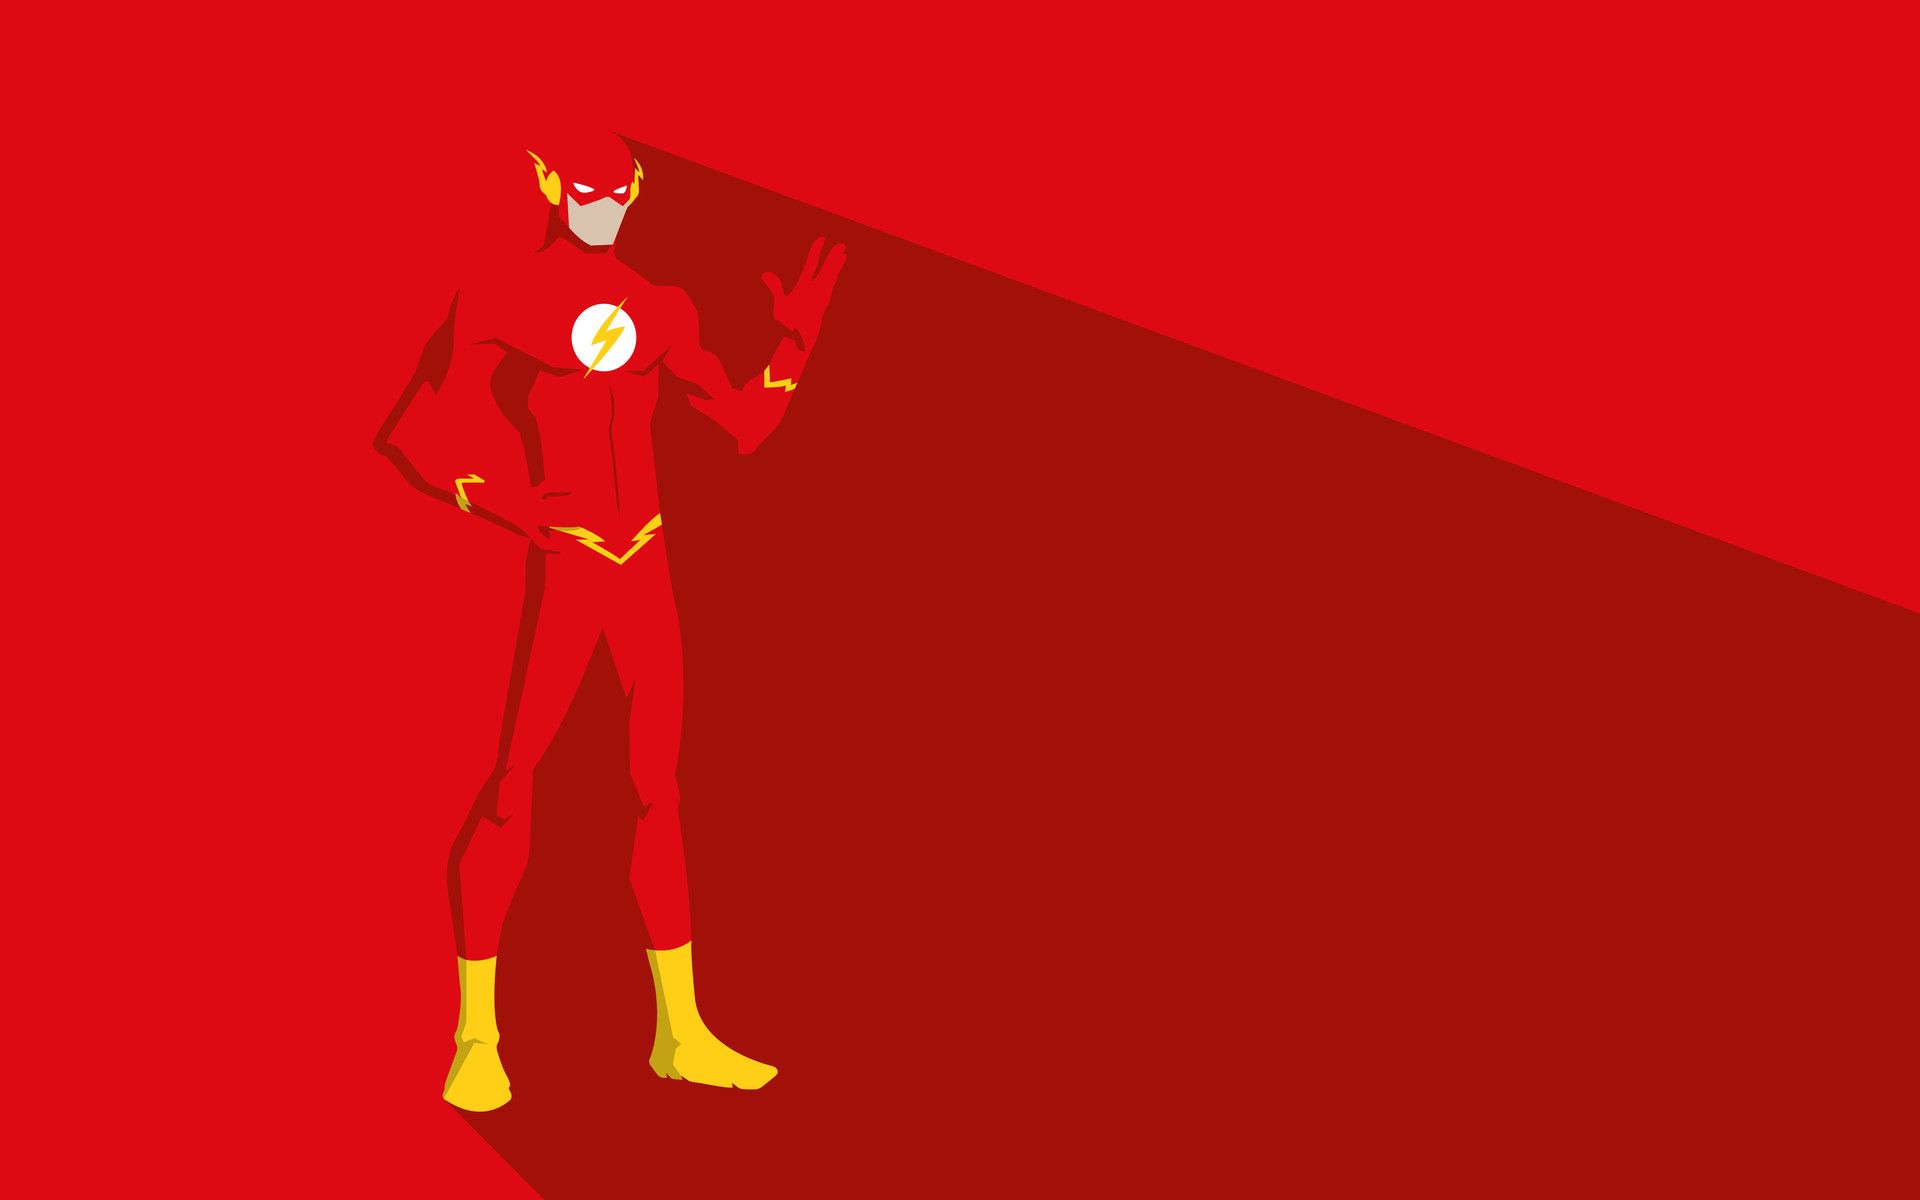 The Flash Minimal 1440x900 Resolution HD 4k Wallpaper, Image, Background, Photo and Picture